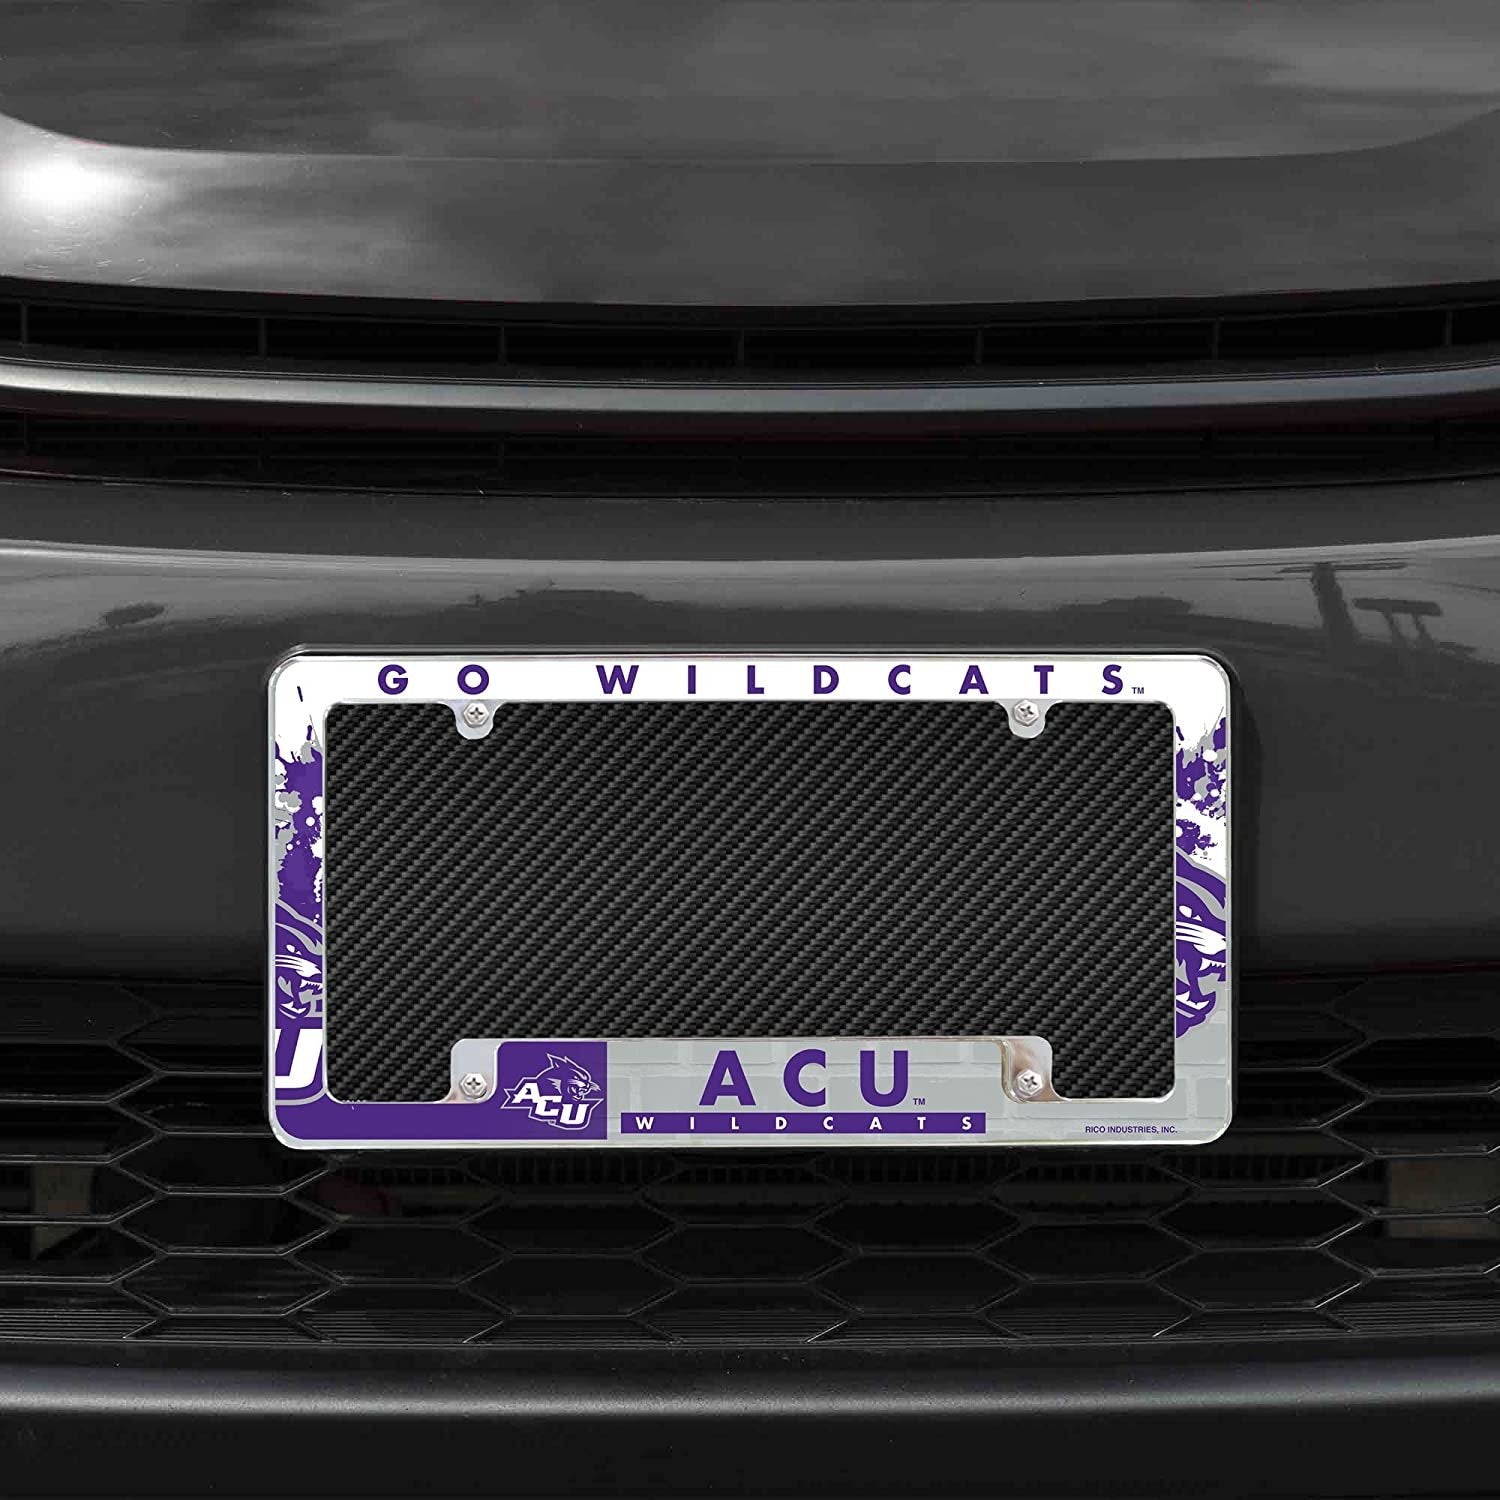 Abilene Christian University Wildcats Metal License Plate Frame Chrome Tag Cover All Over Design 6x12 Inch